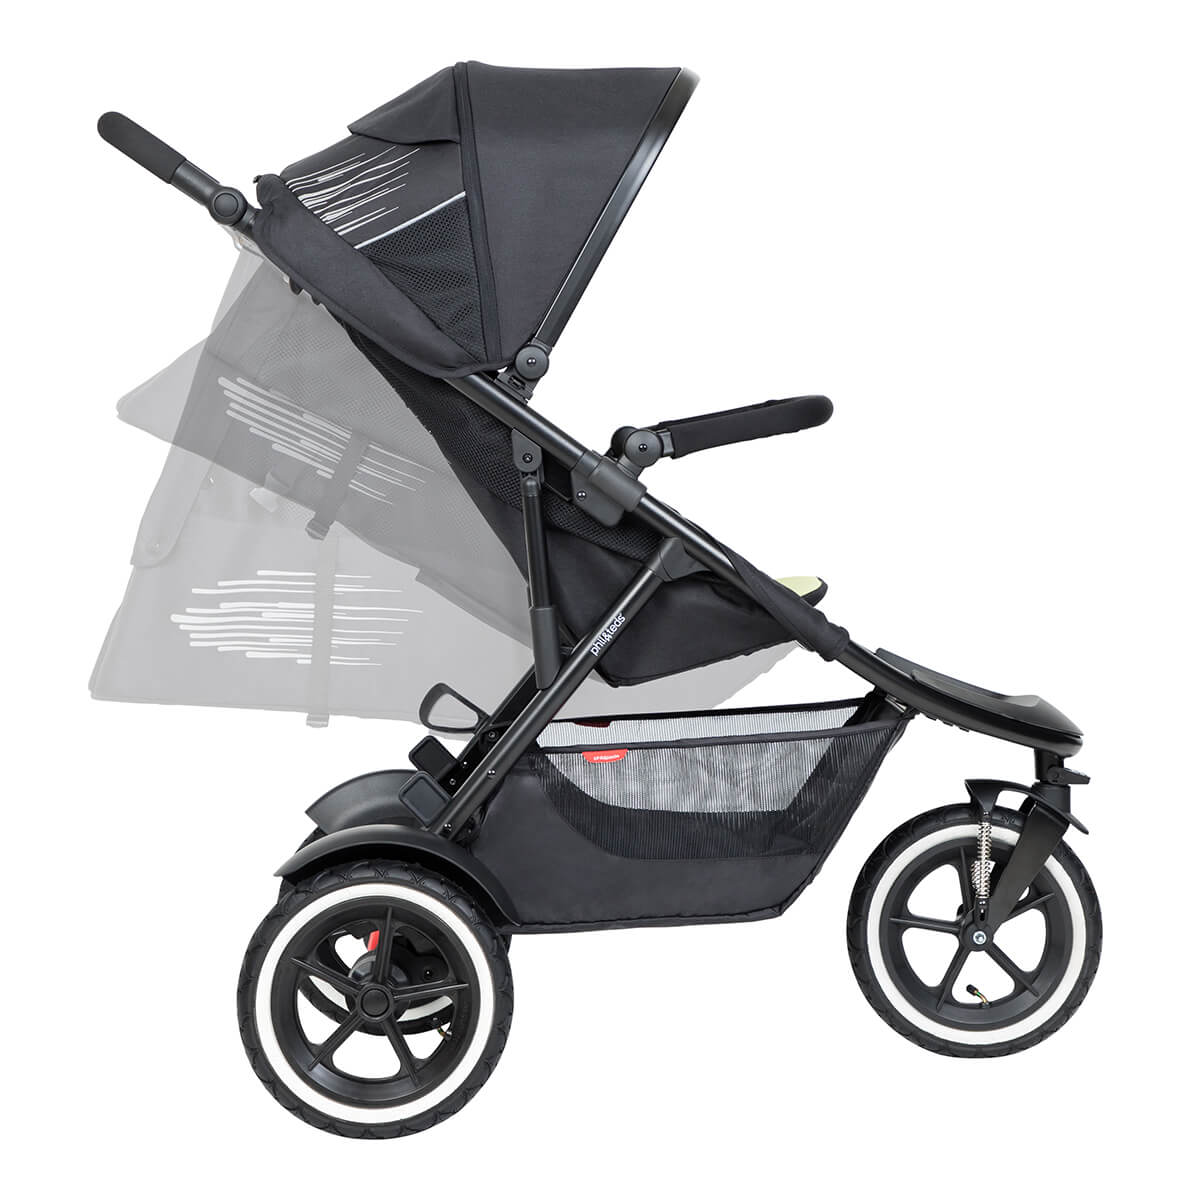 https://cdn.accentuate.io/7508551401650/19437753335986/philteds-sport-buggy-can-recline-in-multiple-angles-including-full-recline-for-newborn-baby-v1667174389418.jpg?1200x1200